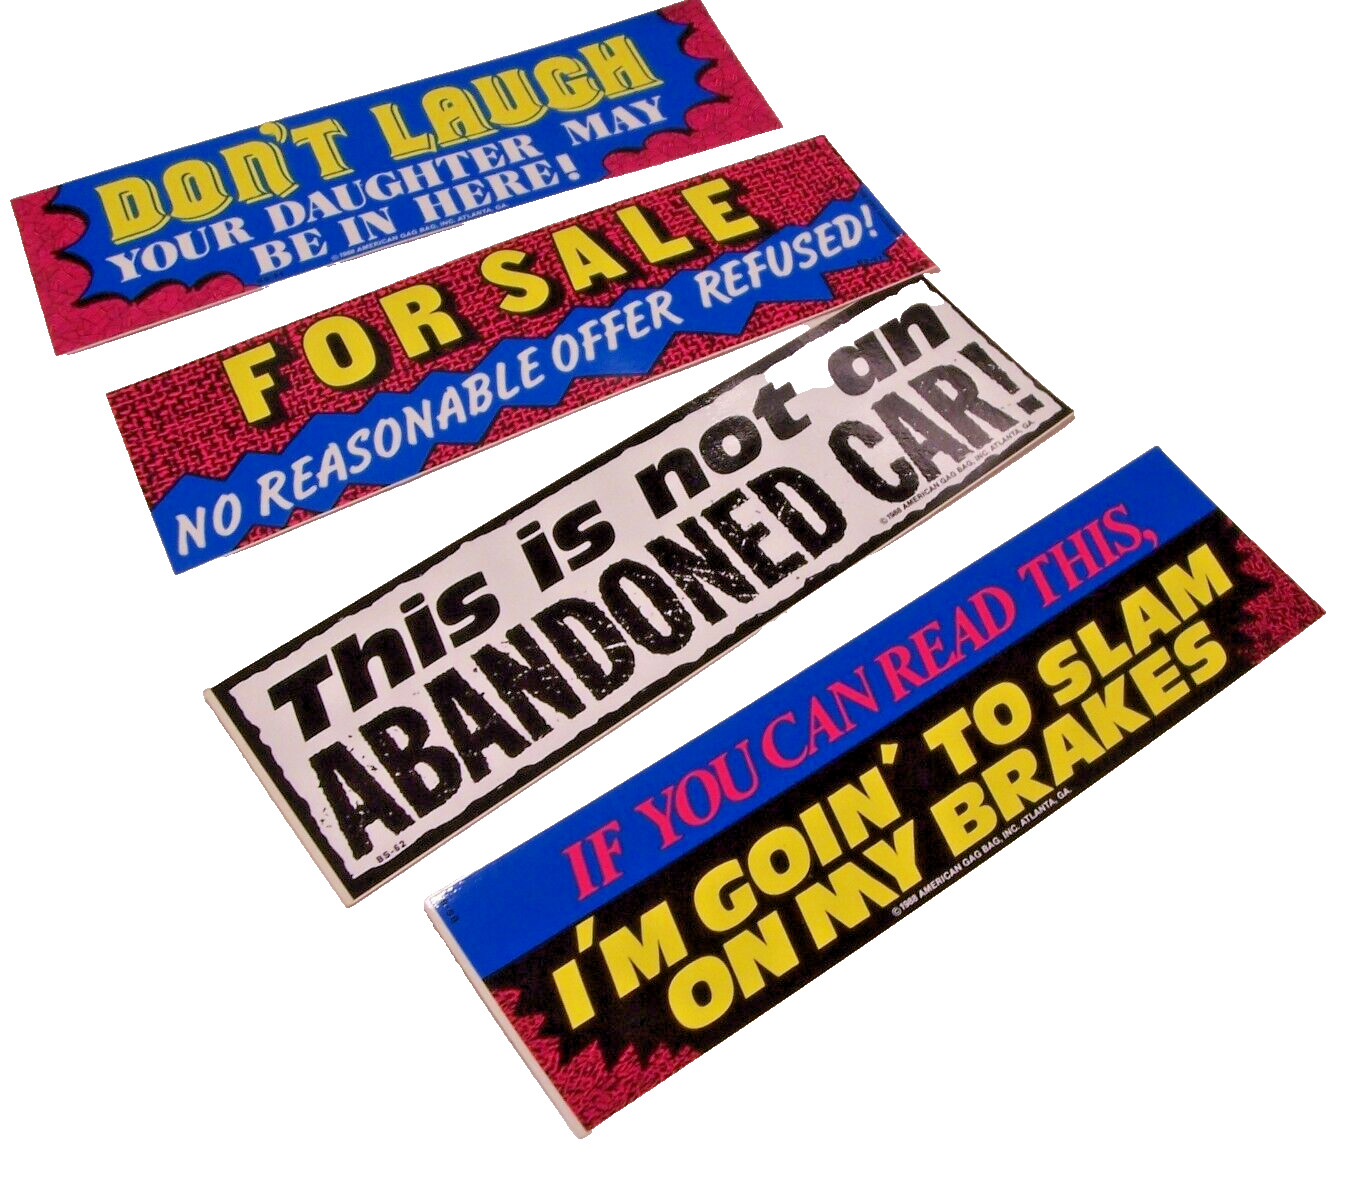 4 GENUINE VINTAGE 1980’s MIXED FUNNY BUMPER STICKERS HUMOR MADE IN THE USA